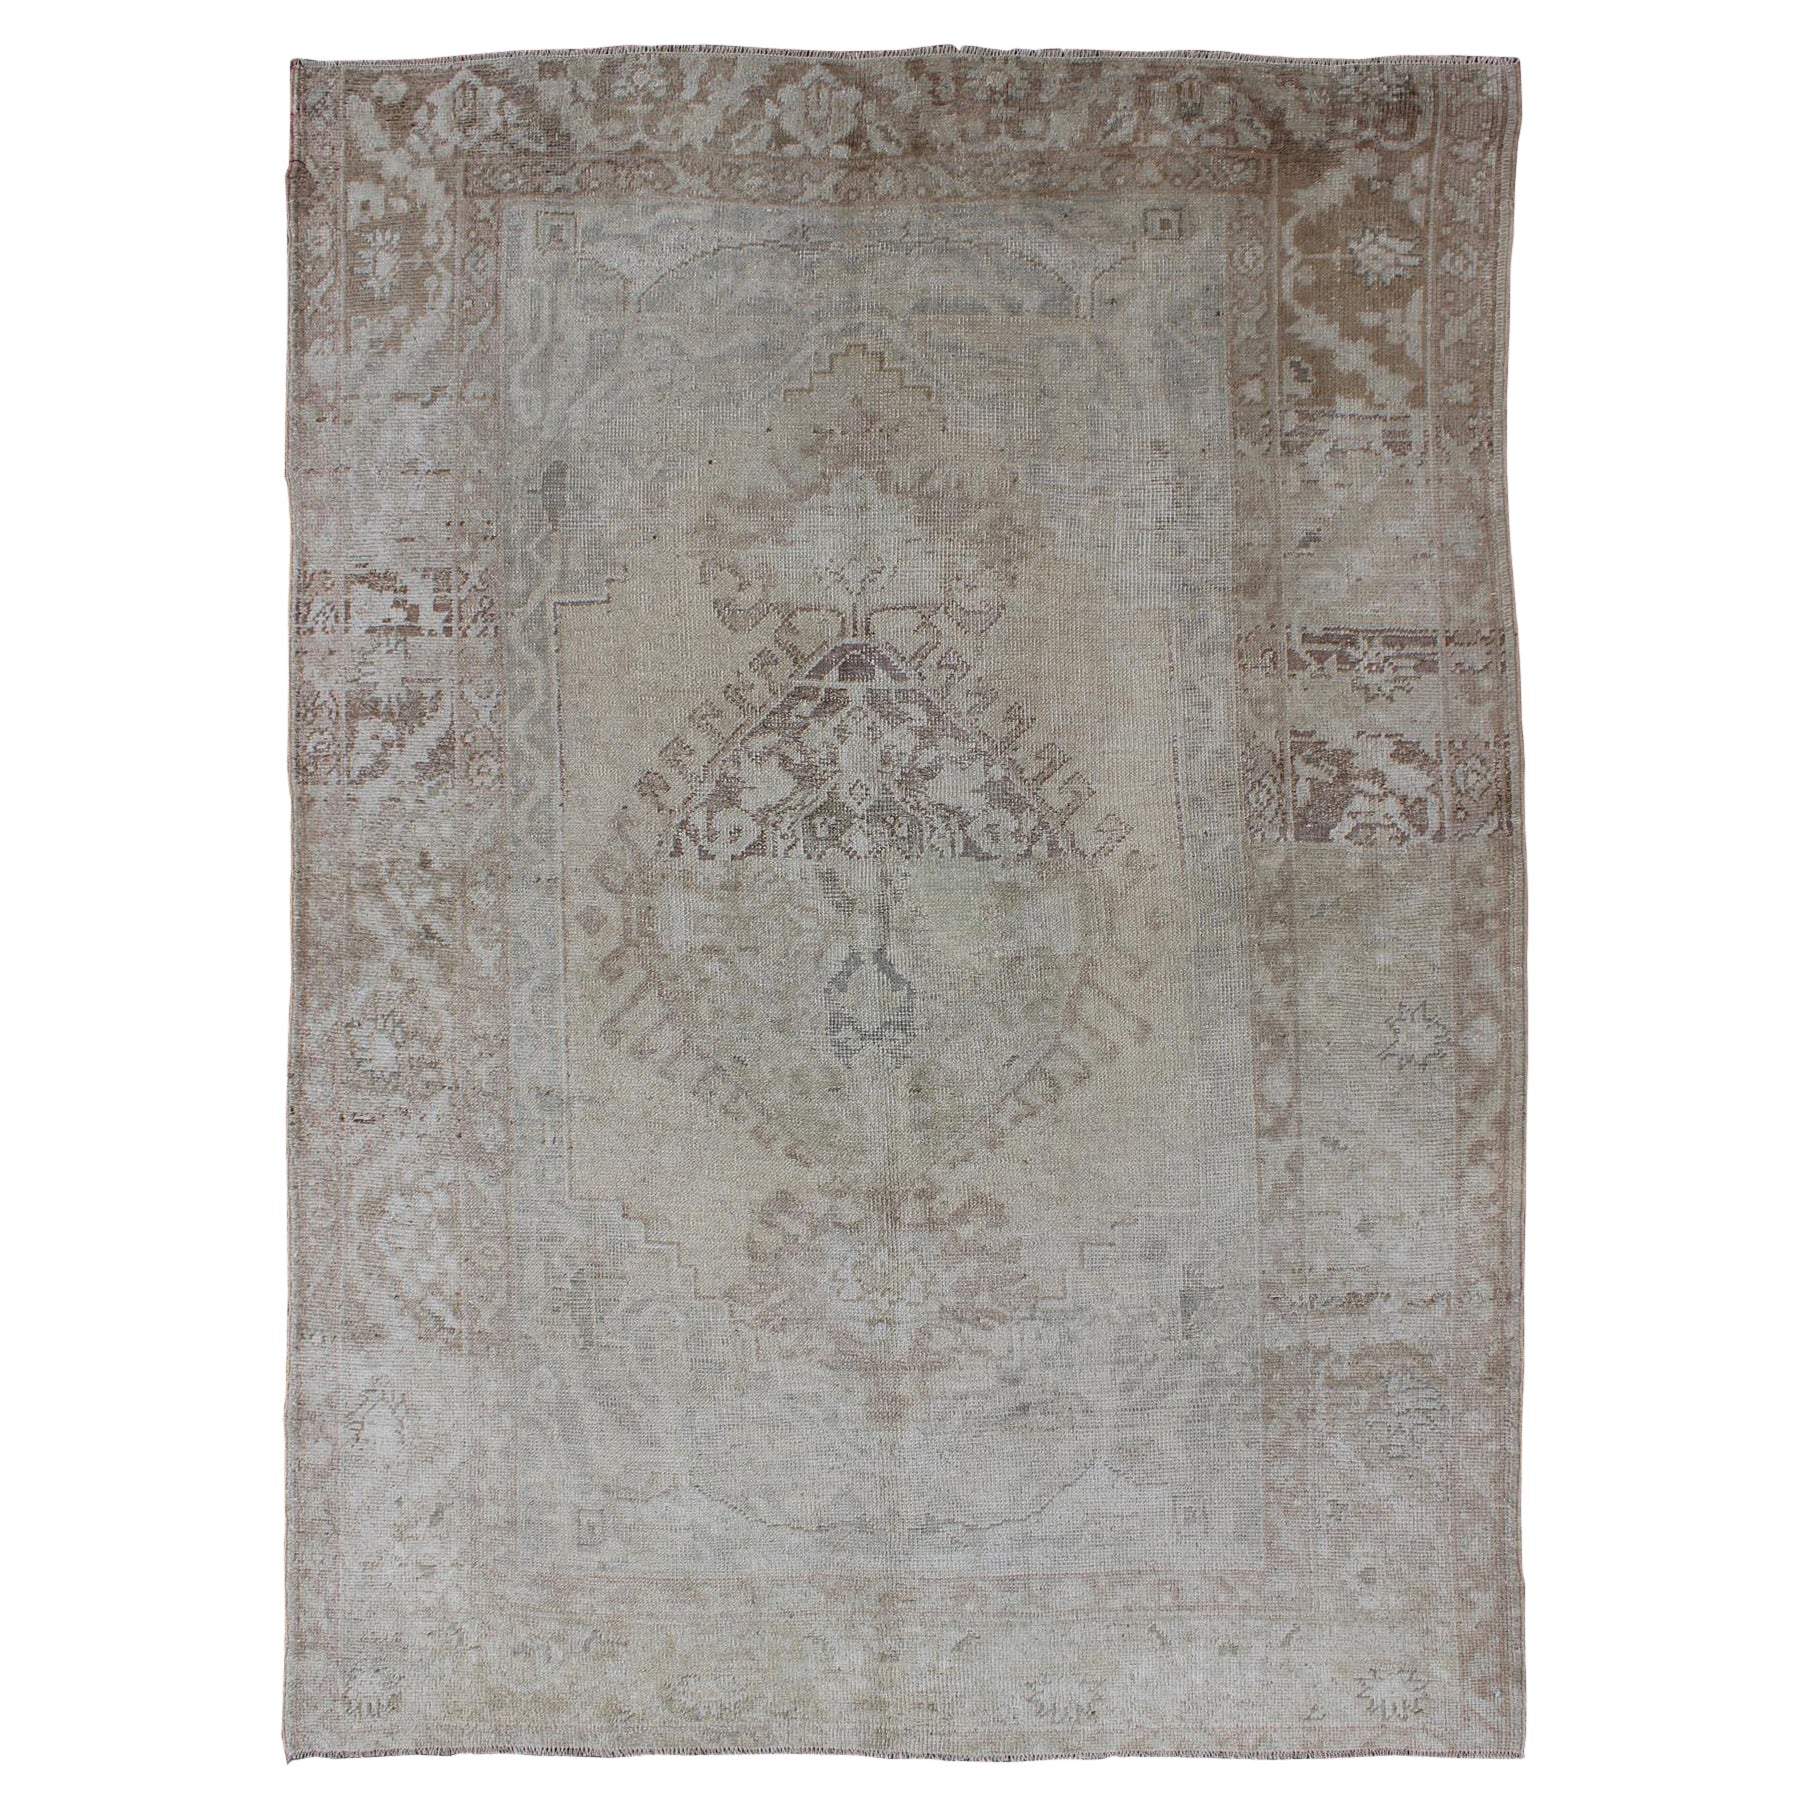 Earth Tones Antique Turkish Oushak Rug with Faded Colors in Medallion Design For Sale